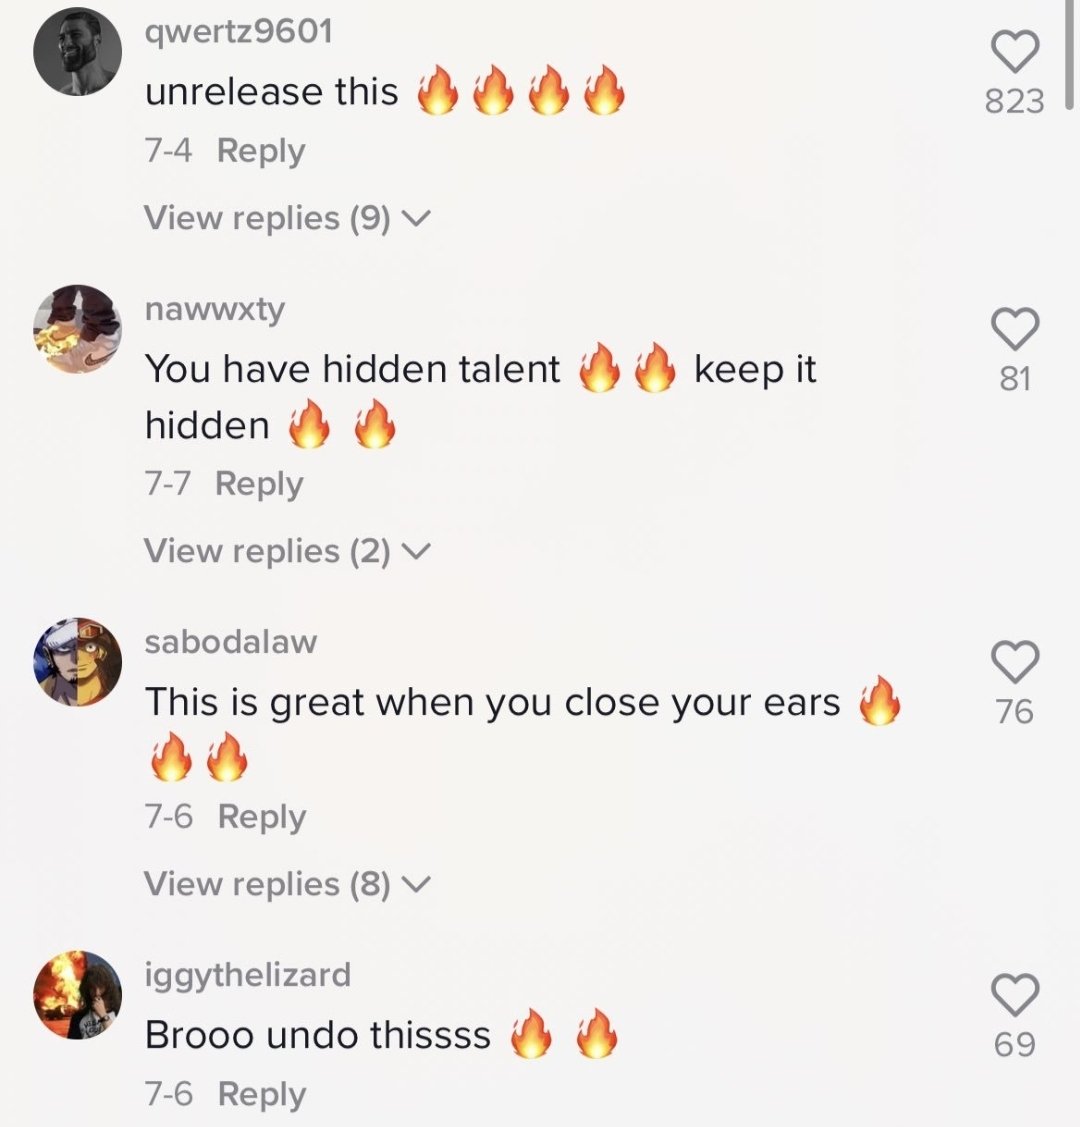 Crazy Interactions - You have hidden talent hidden 77 View replies 2 sabodalaw This is great when you close your ears 76 View replies 8 keep it iggythelizard Brooo undo thissss 76 823 81 76 69